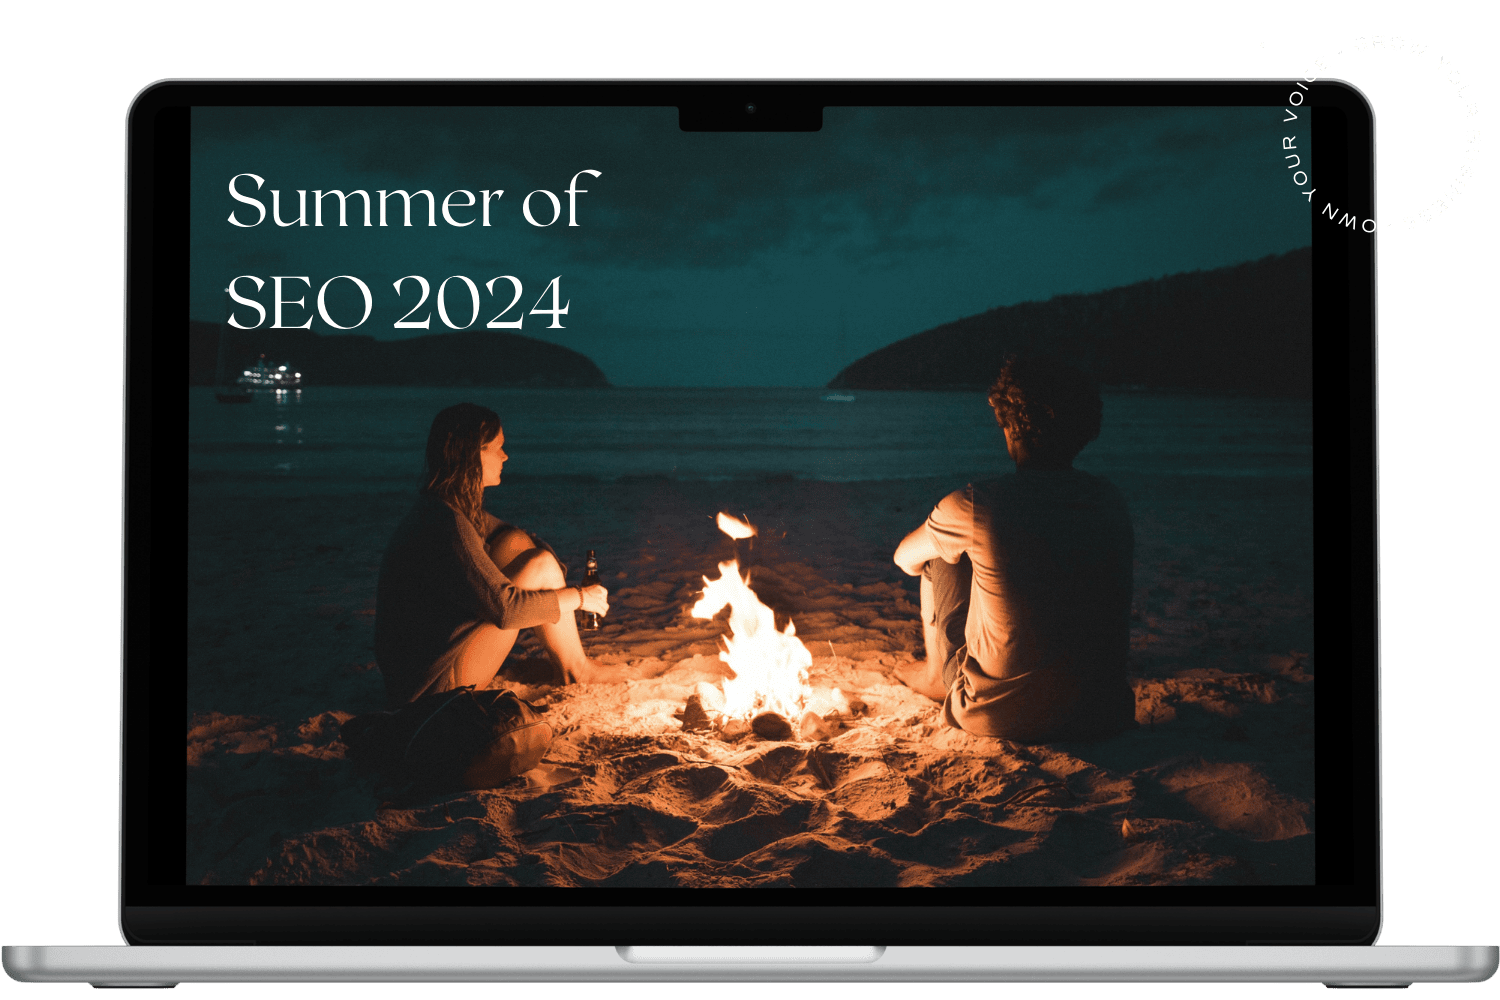 Laptop with campfire photo reading "Summer of SEO 2024"